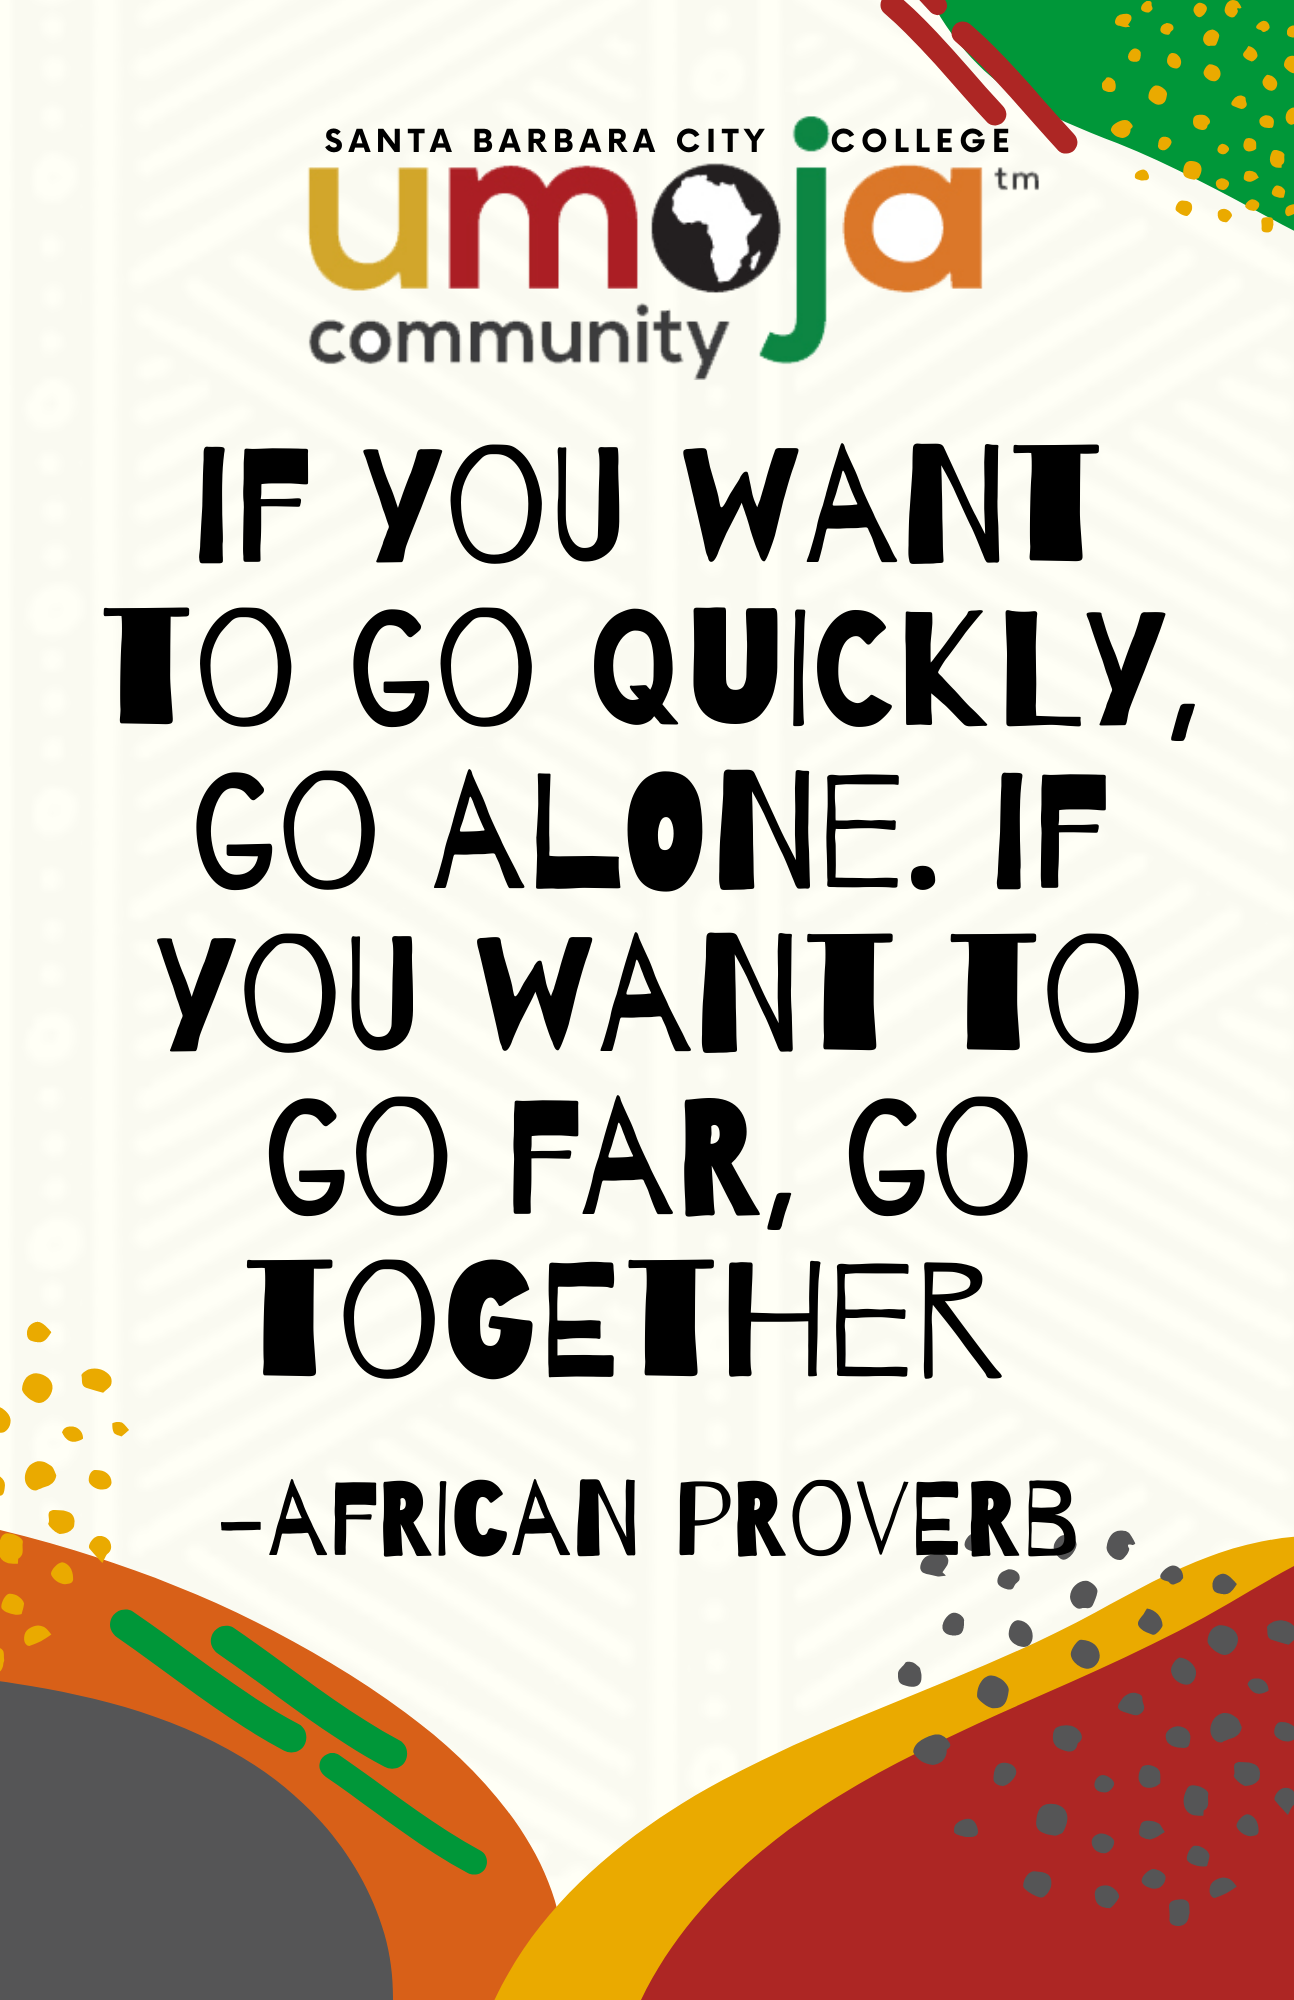 If you want to go far, go together